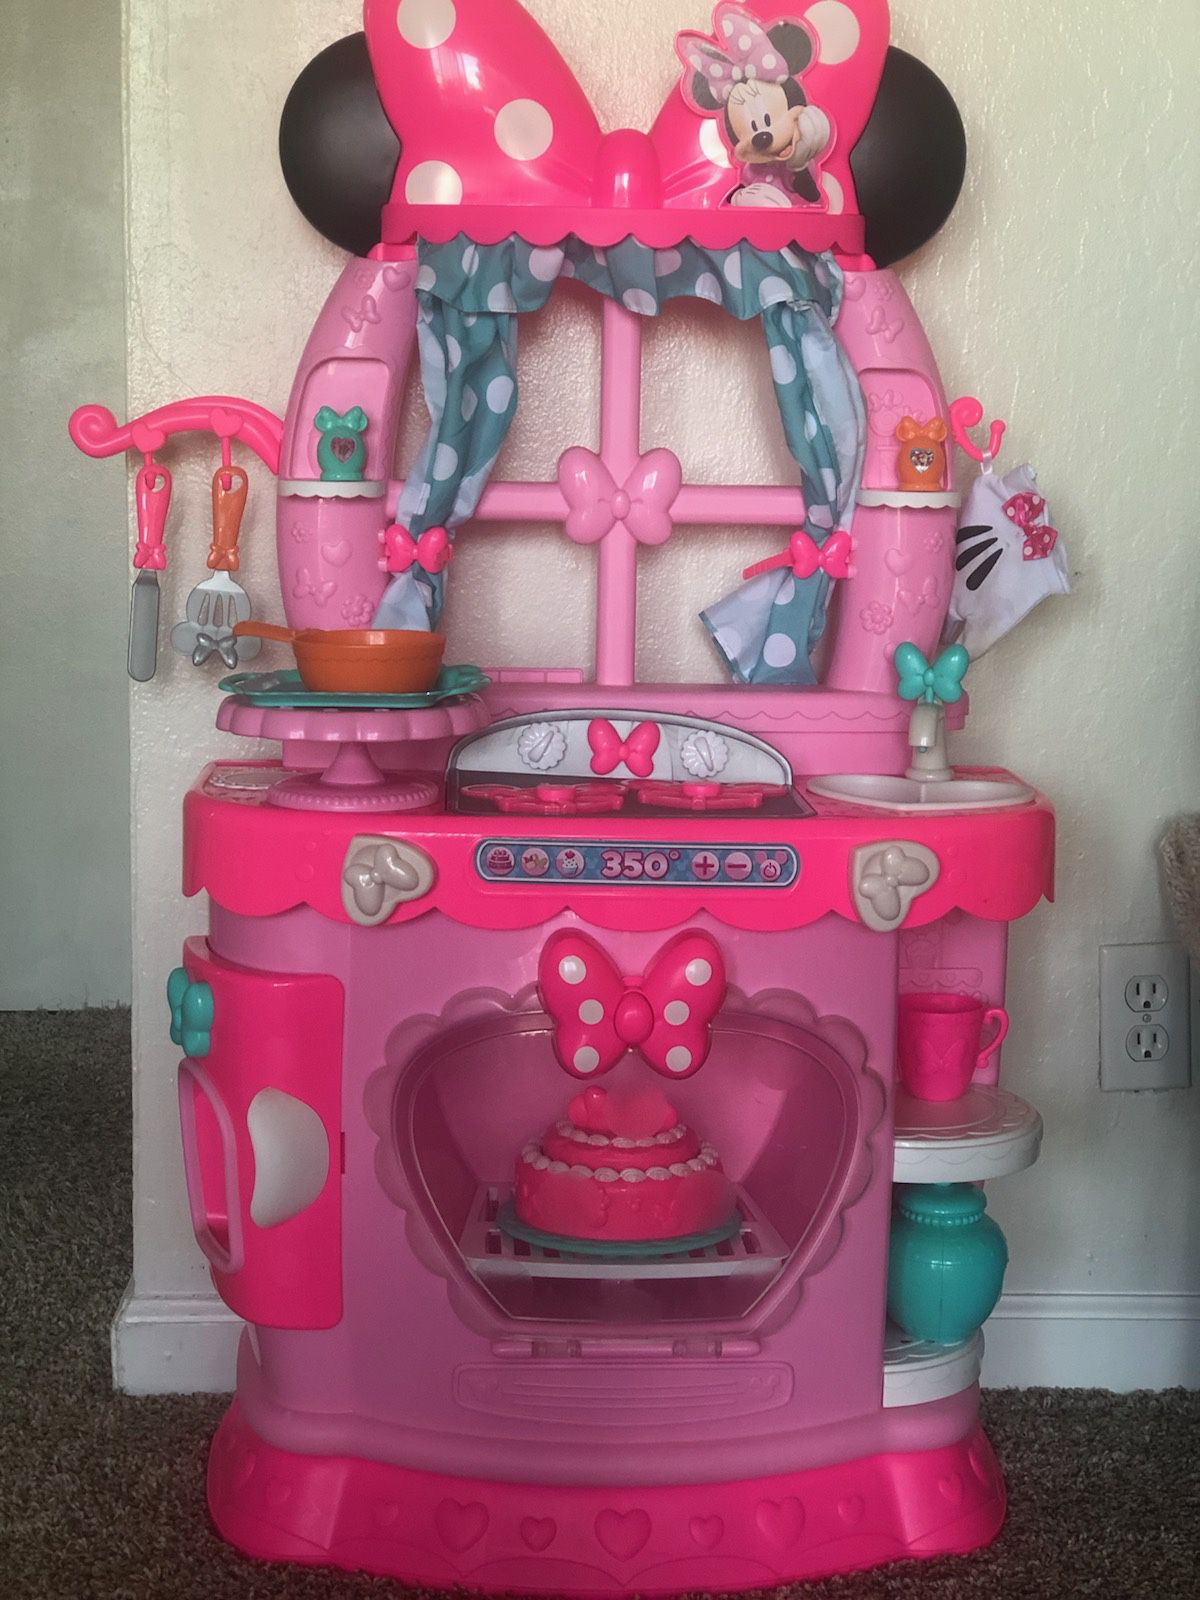 Minnie Mouse high quality kitchen